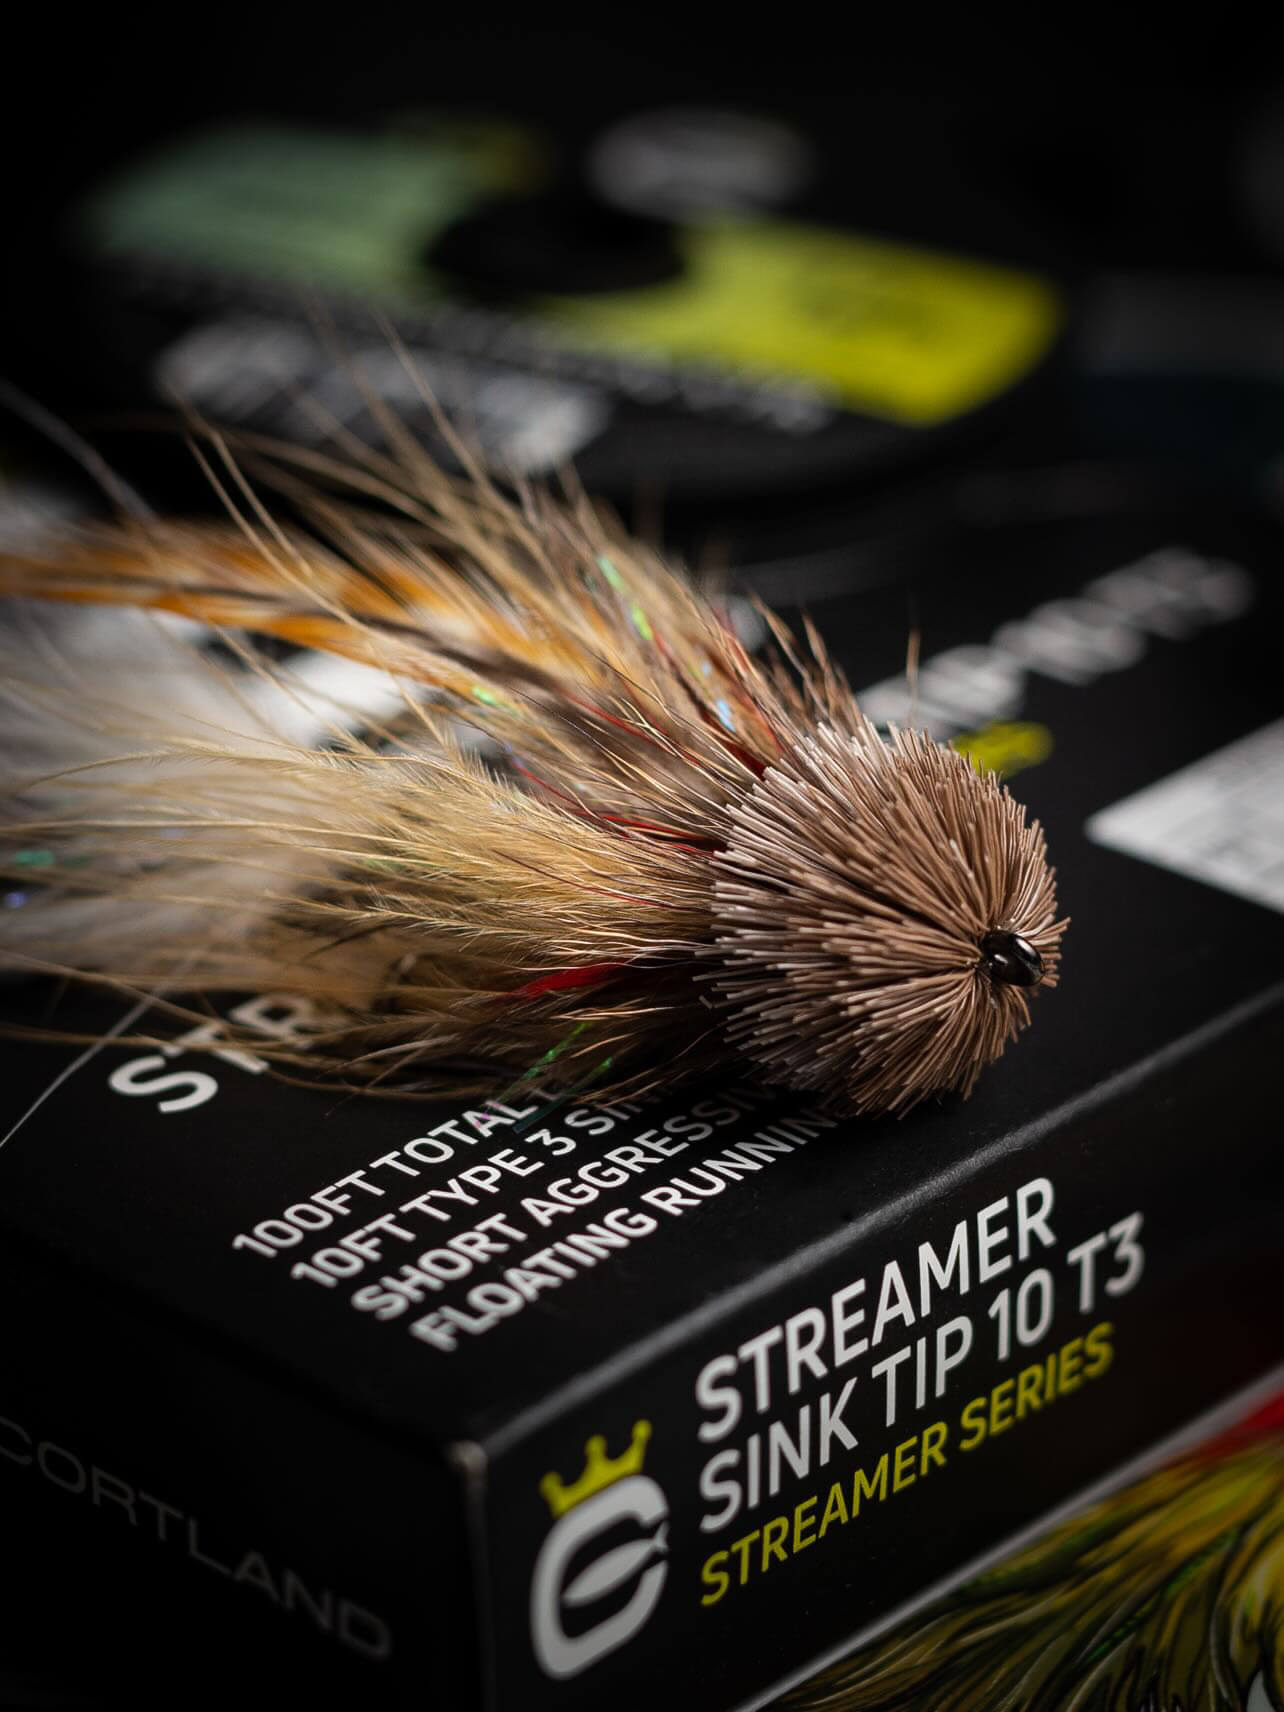 Closeup shot of the Streamer Sink Tip 10 T3 box with a fishing fly on top of it 